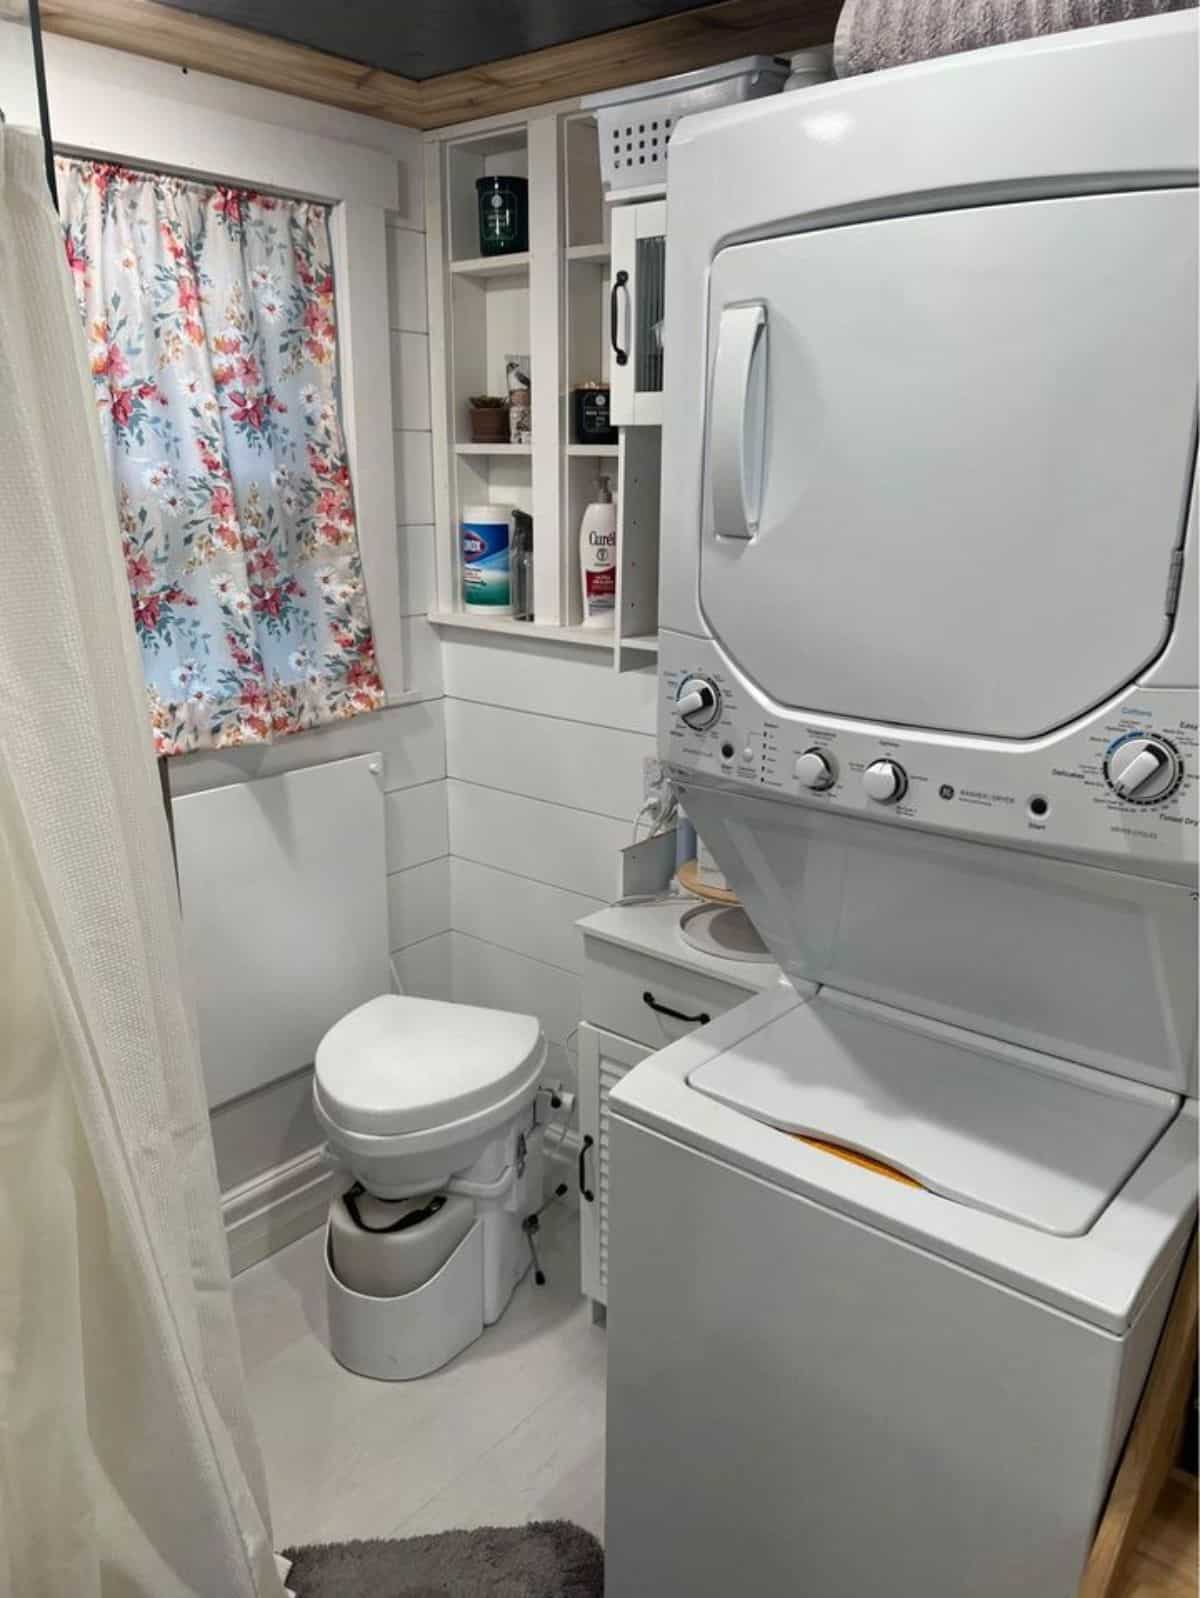 composting toilet , washer dryer combo in bathroom  of spacious tiny home